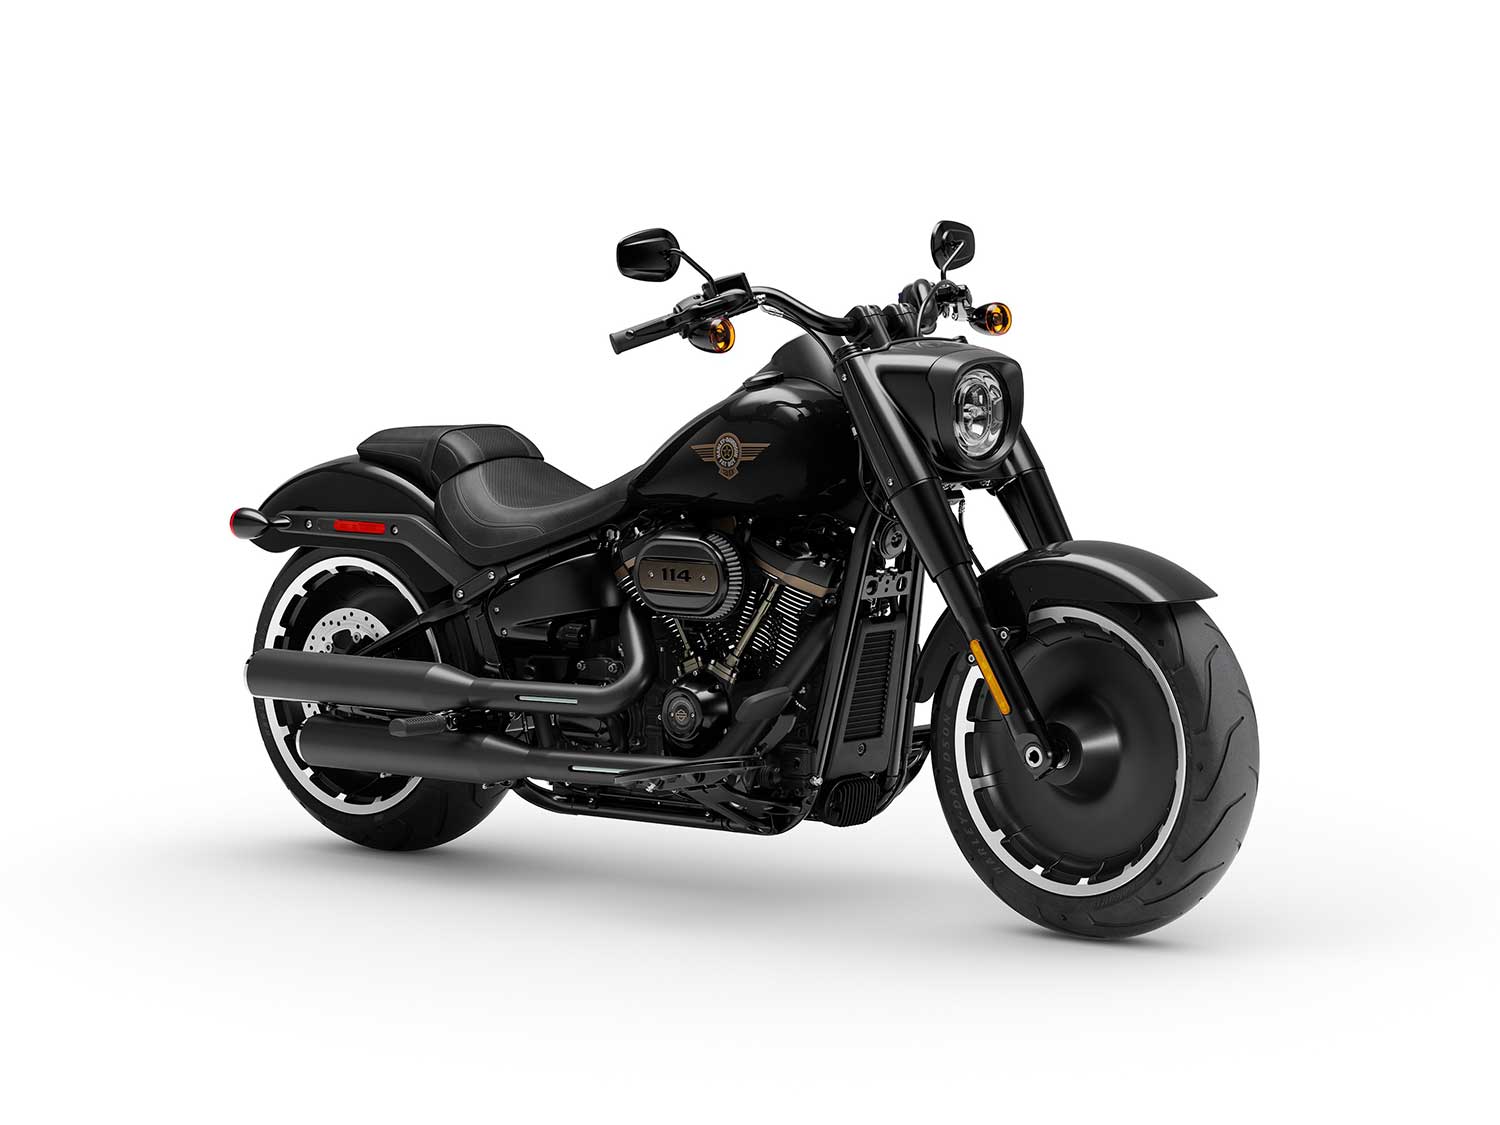 Harley has rolled out its first 2020 mid-year model, the limited-edition Fat Boy 30th Anniversary motorcycle.